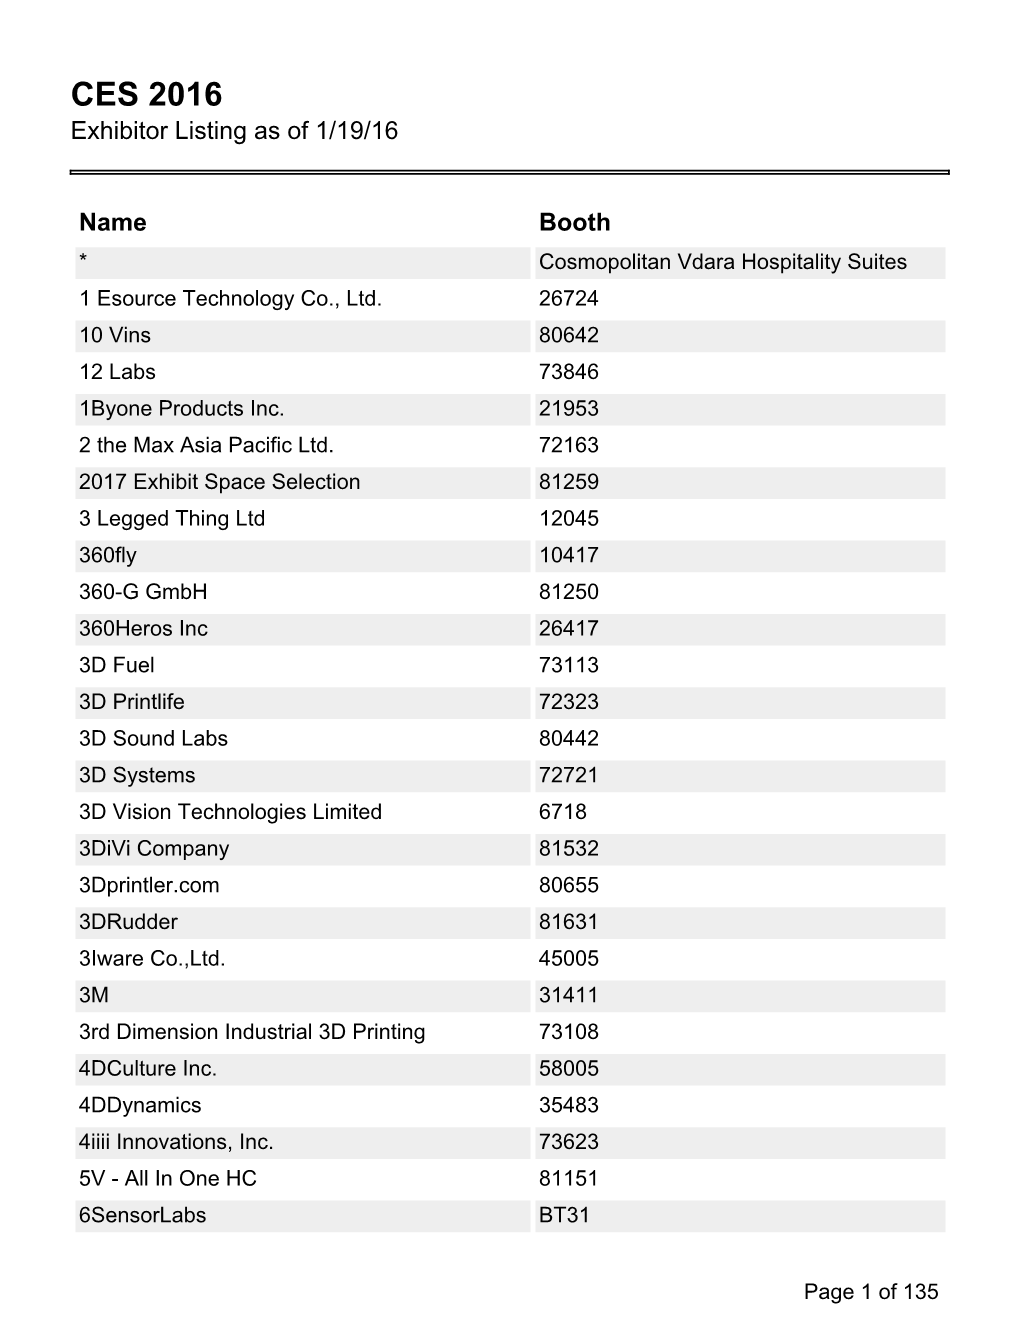 CES 2016 Exhibitor Listing As of 1/19/16